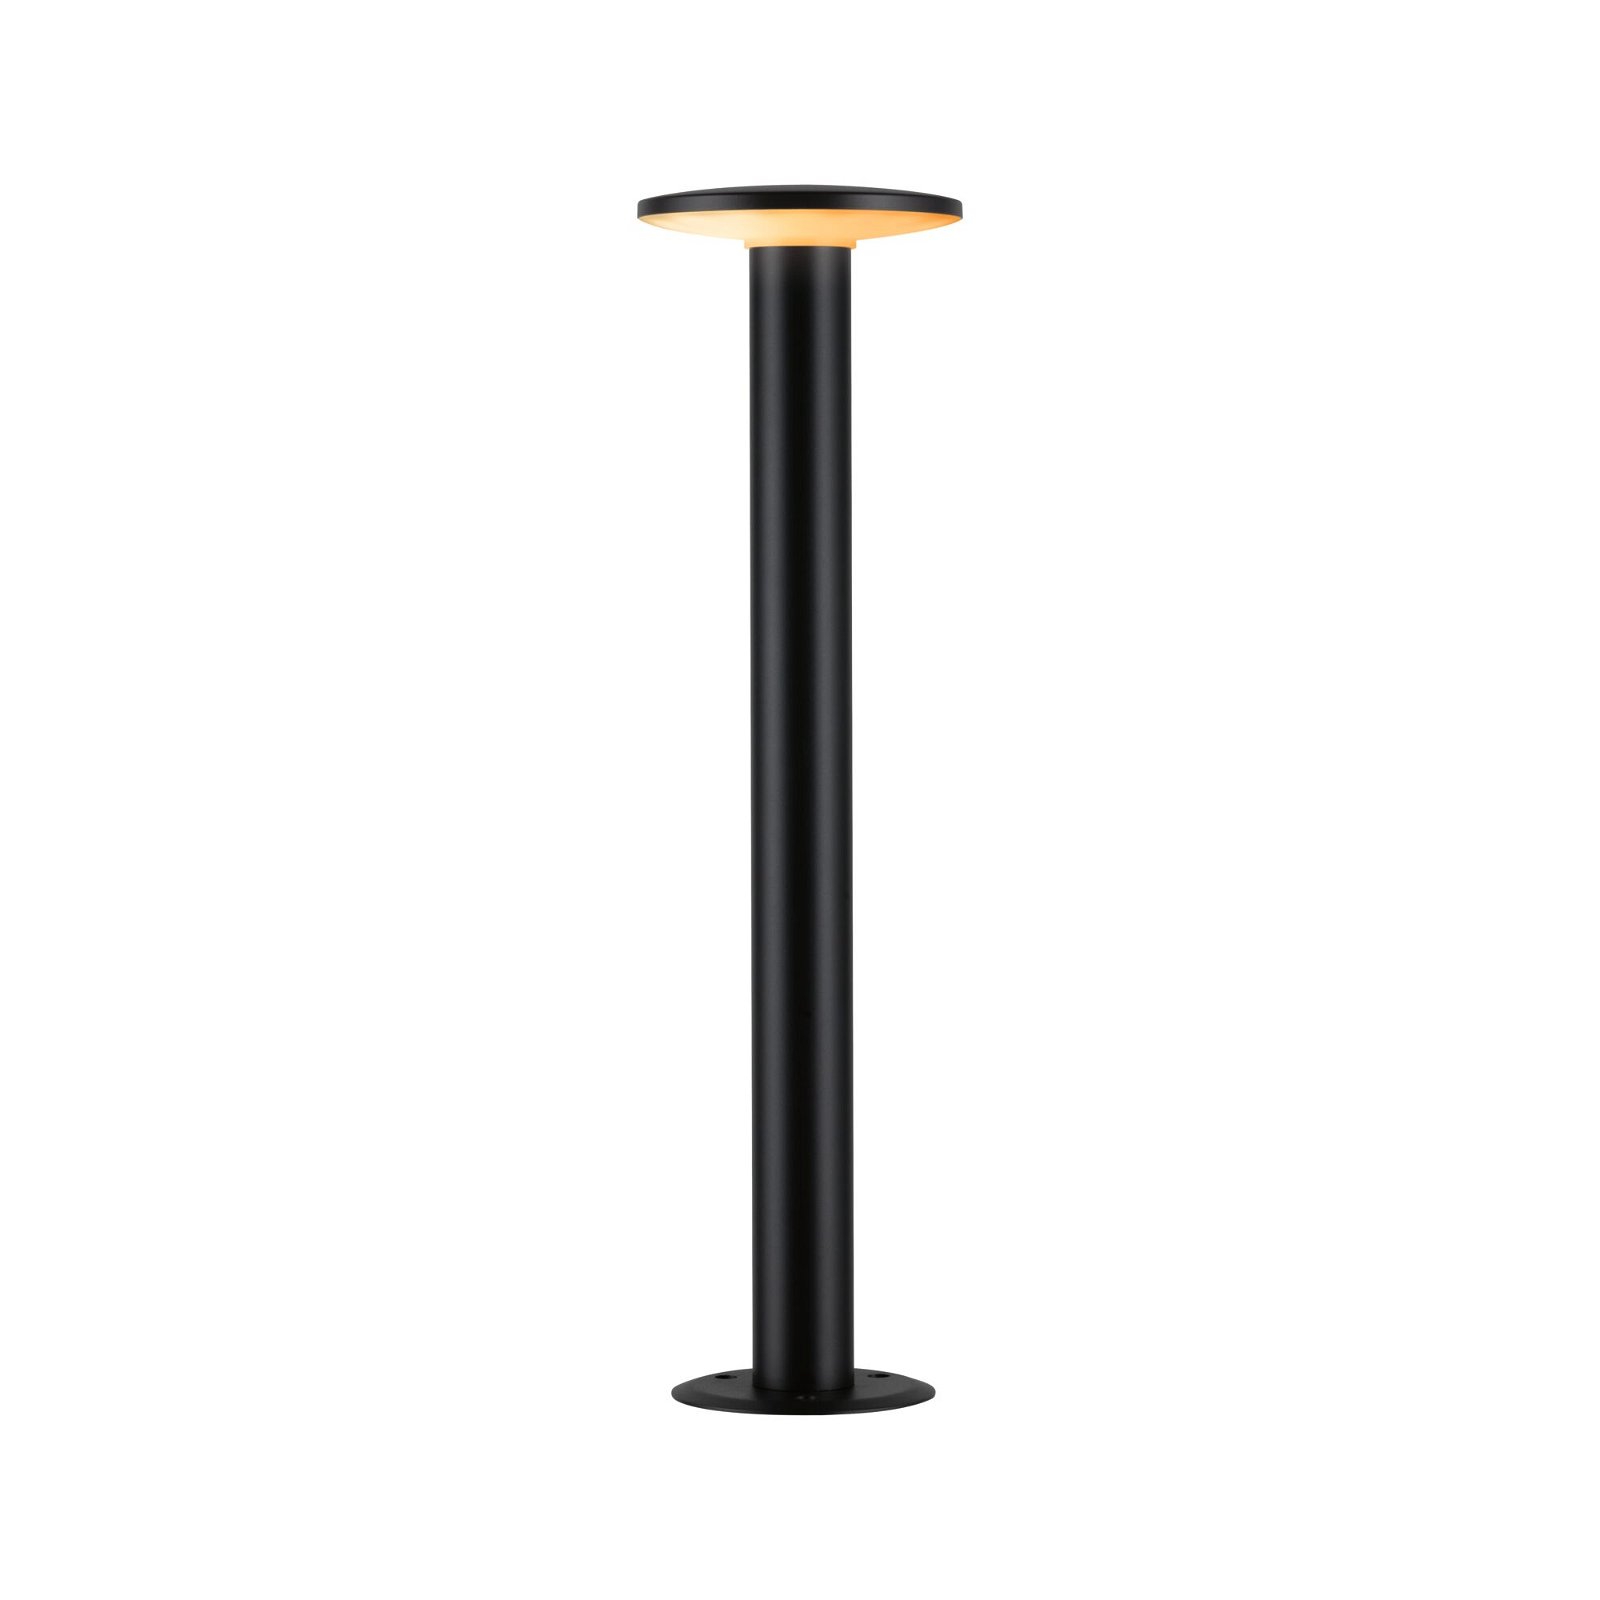 LED Bollard luminaire Smart Home Zigbee Plate insect friendly\n IP44 600mm Tunable Warm 5,5W 280lm 230V Anthracite Metal/Plastic